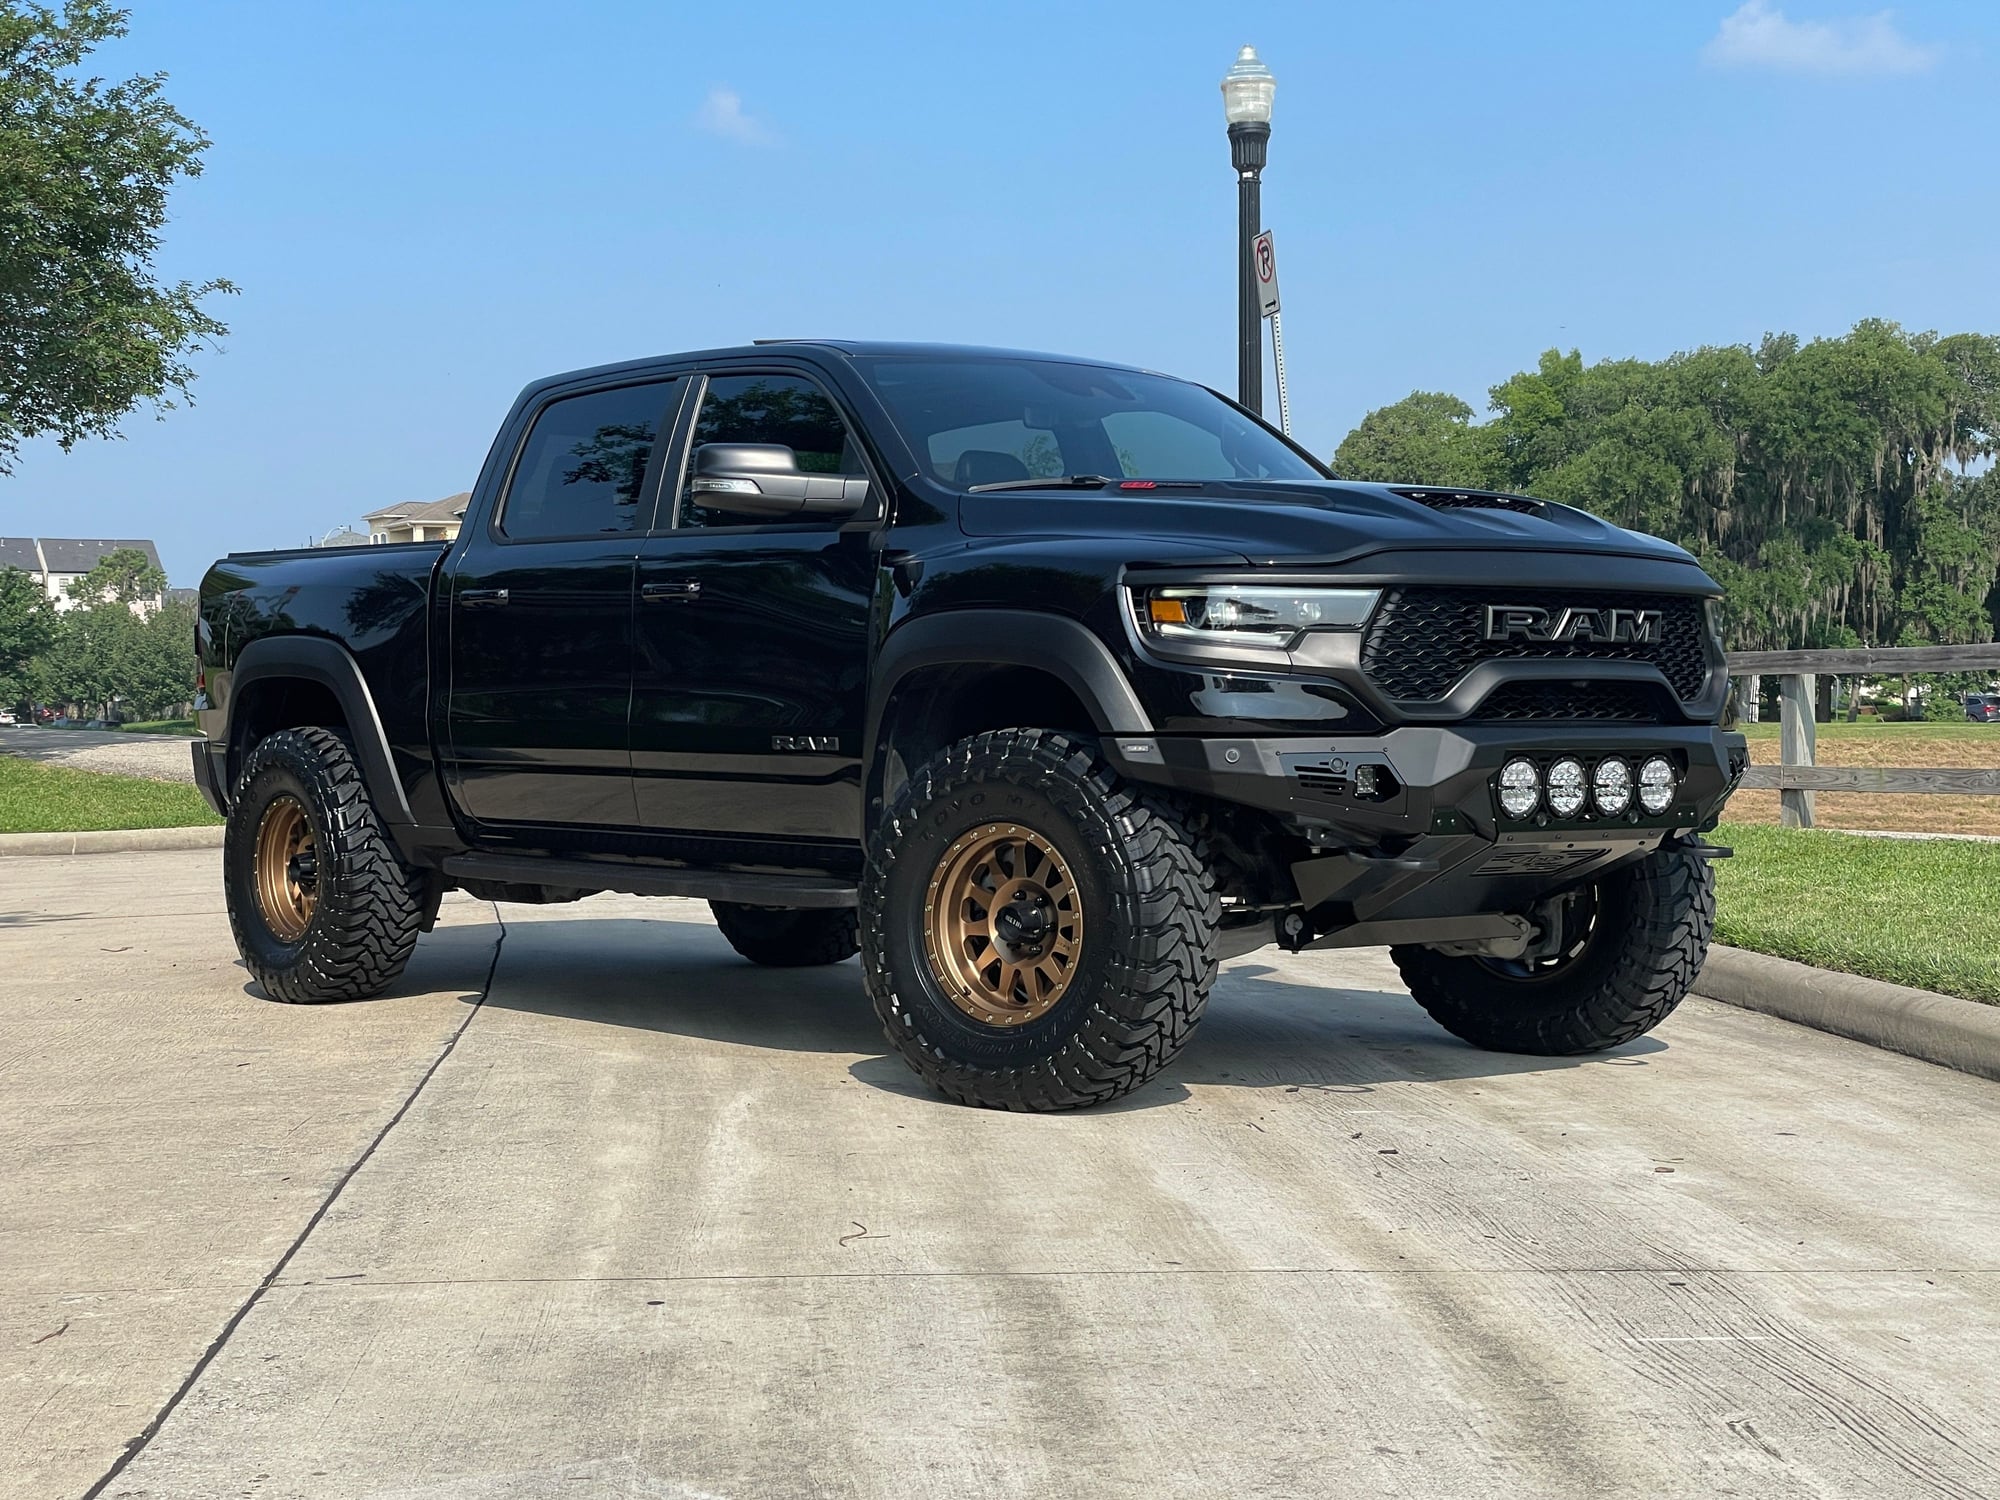 2022 Ram 1500 - 2022 RAM TRX - Loaded with brand new bumpers, wheels, tires, etc. - Used - VIN 1C6SRFU90NN311732 - 13,800 Miles - 8 cyl - 4WD - Automatic - Truck - Black - Houston, TX 77547, United States